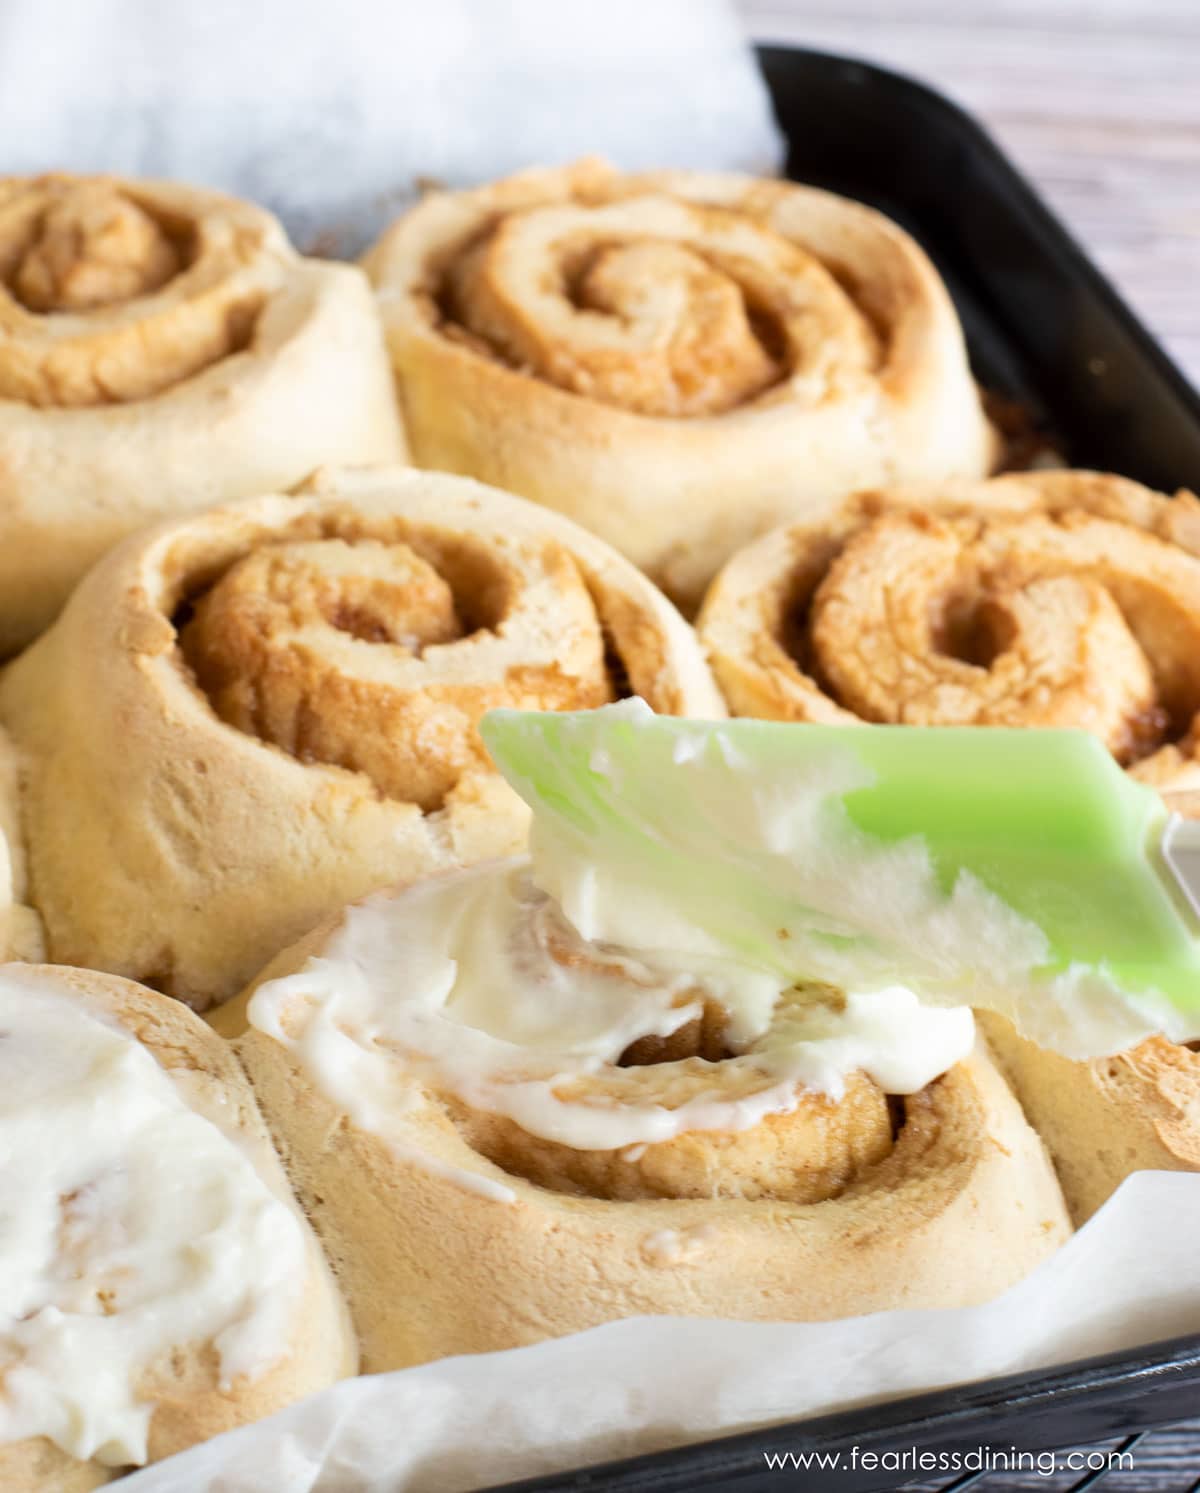 A photo of spreading the icing over the cinnamon rolls.